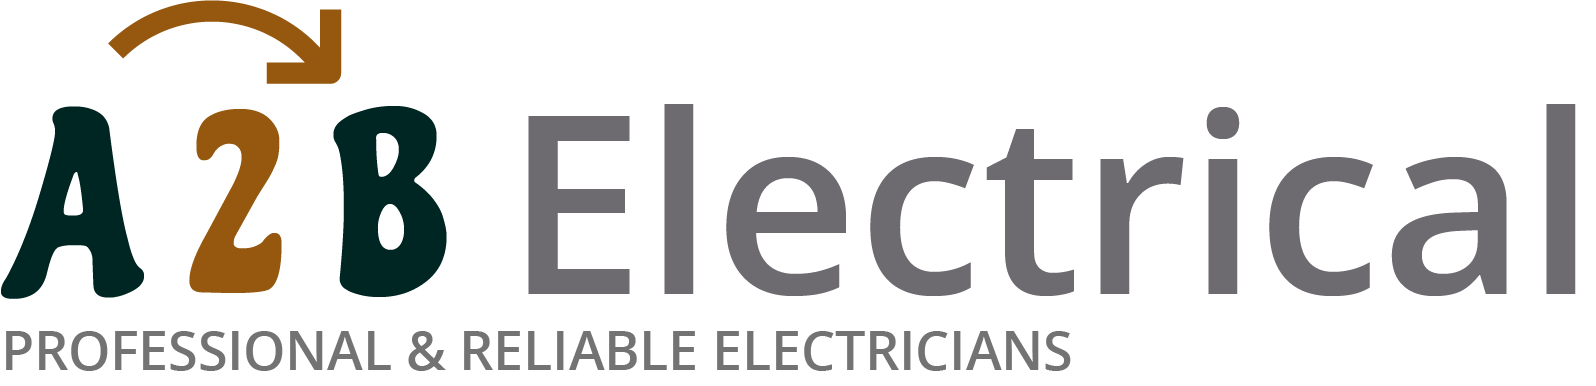 If you have electrical wiring problems in Denton, we can provide an electrician to have a look for you. 